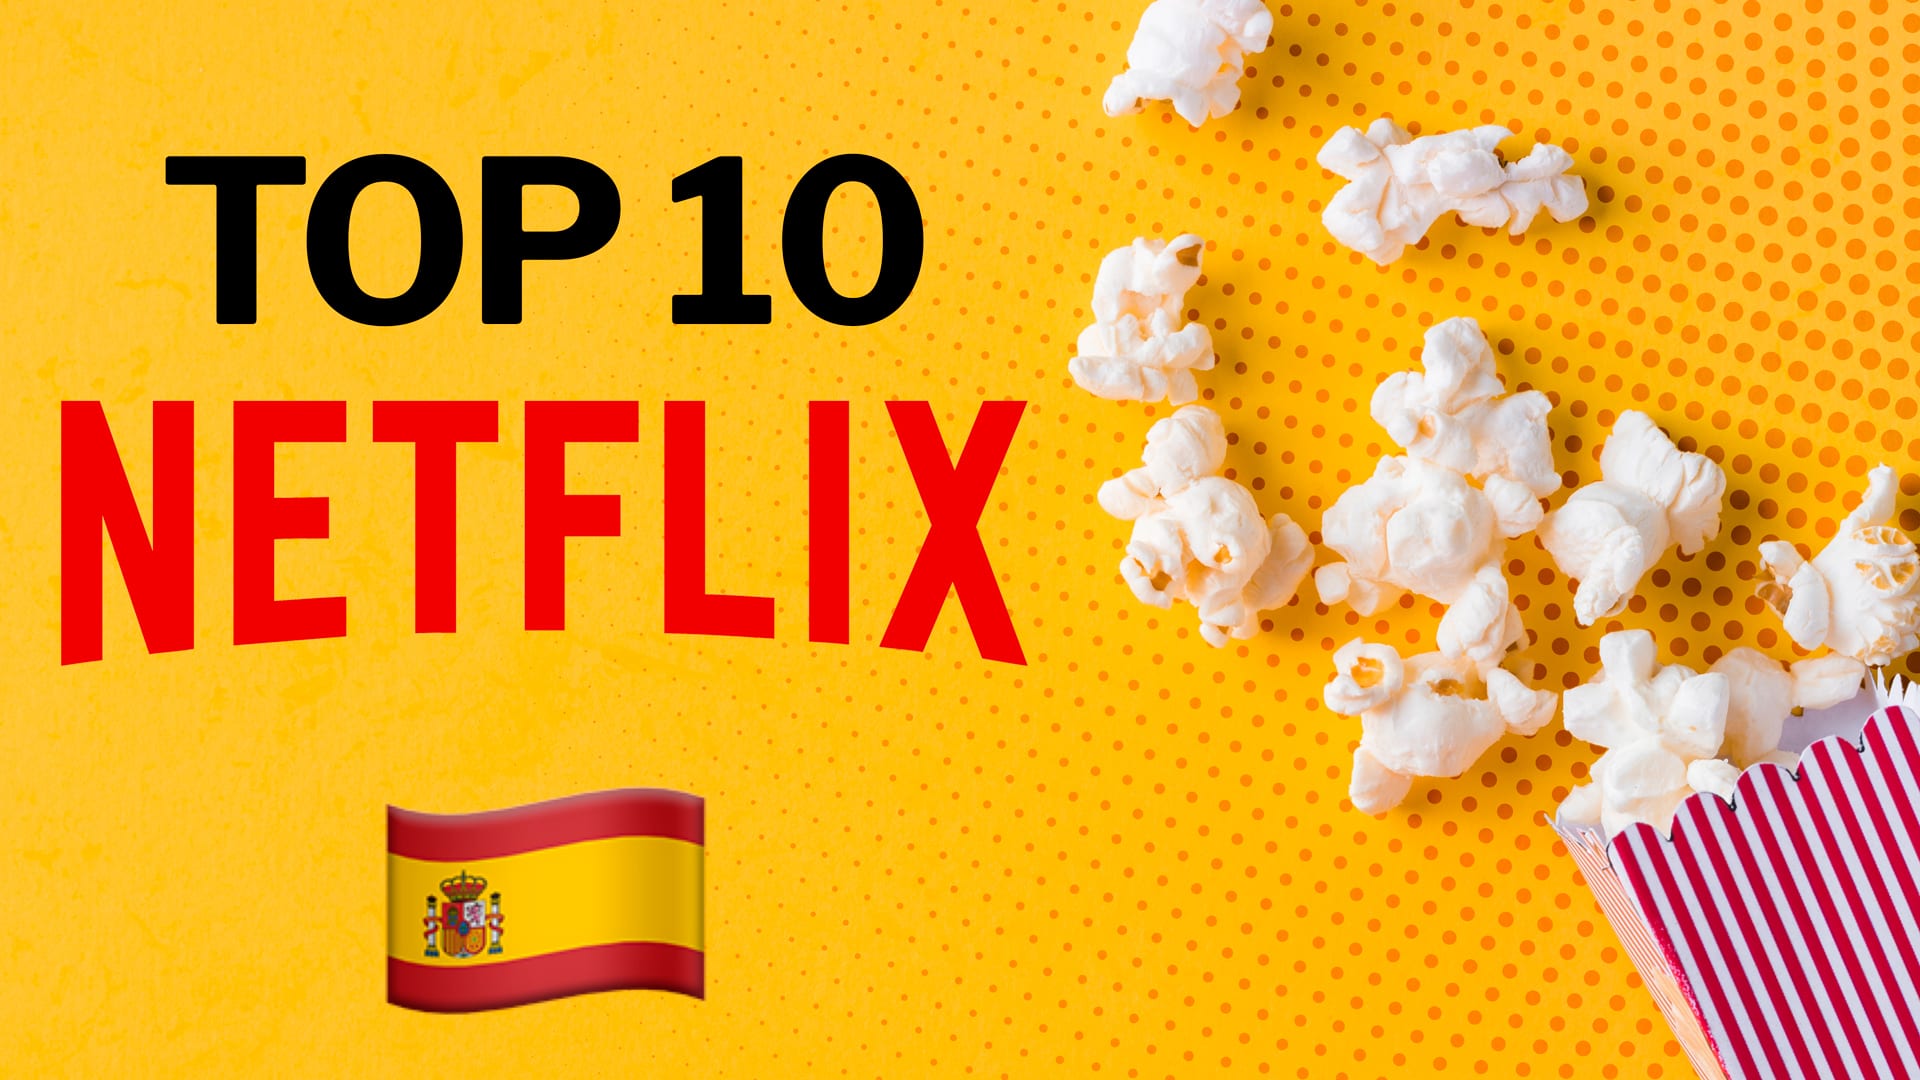 Netflix ranking in Spain: our favorite series for Tuesday, March 15